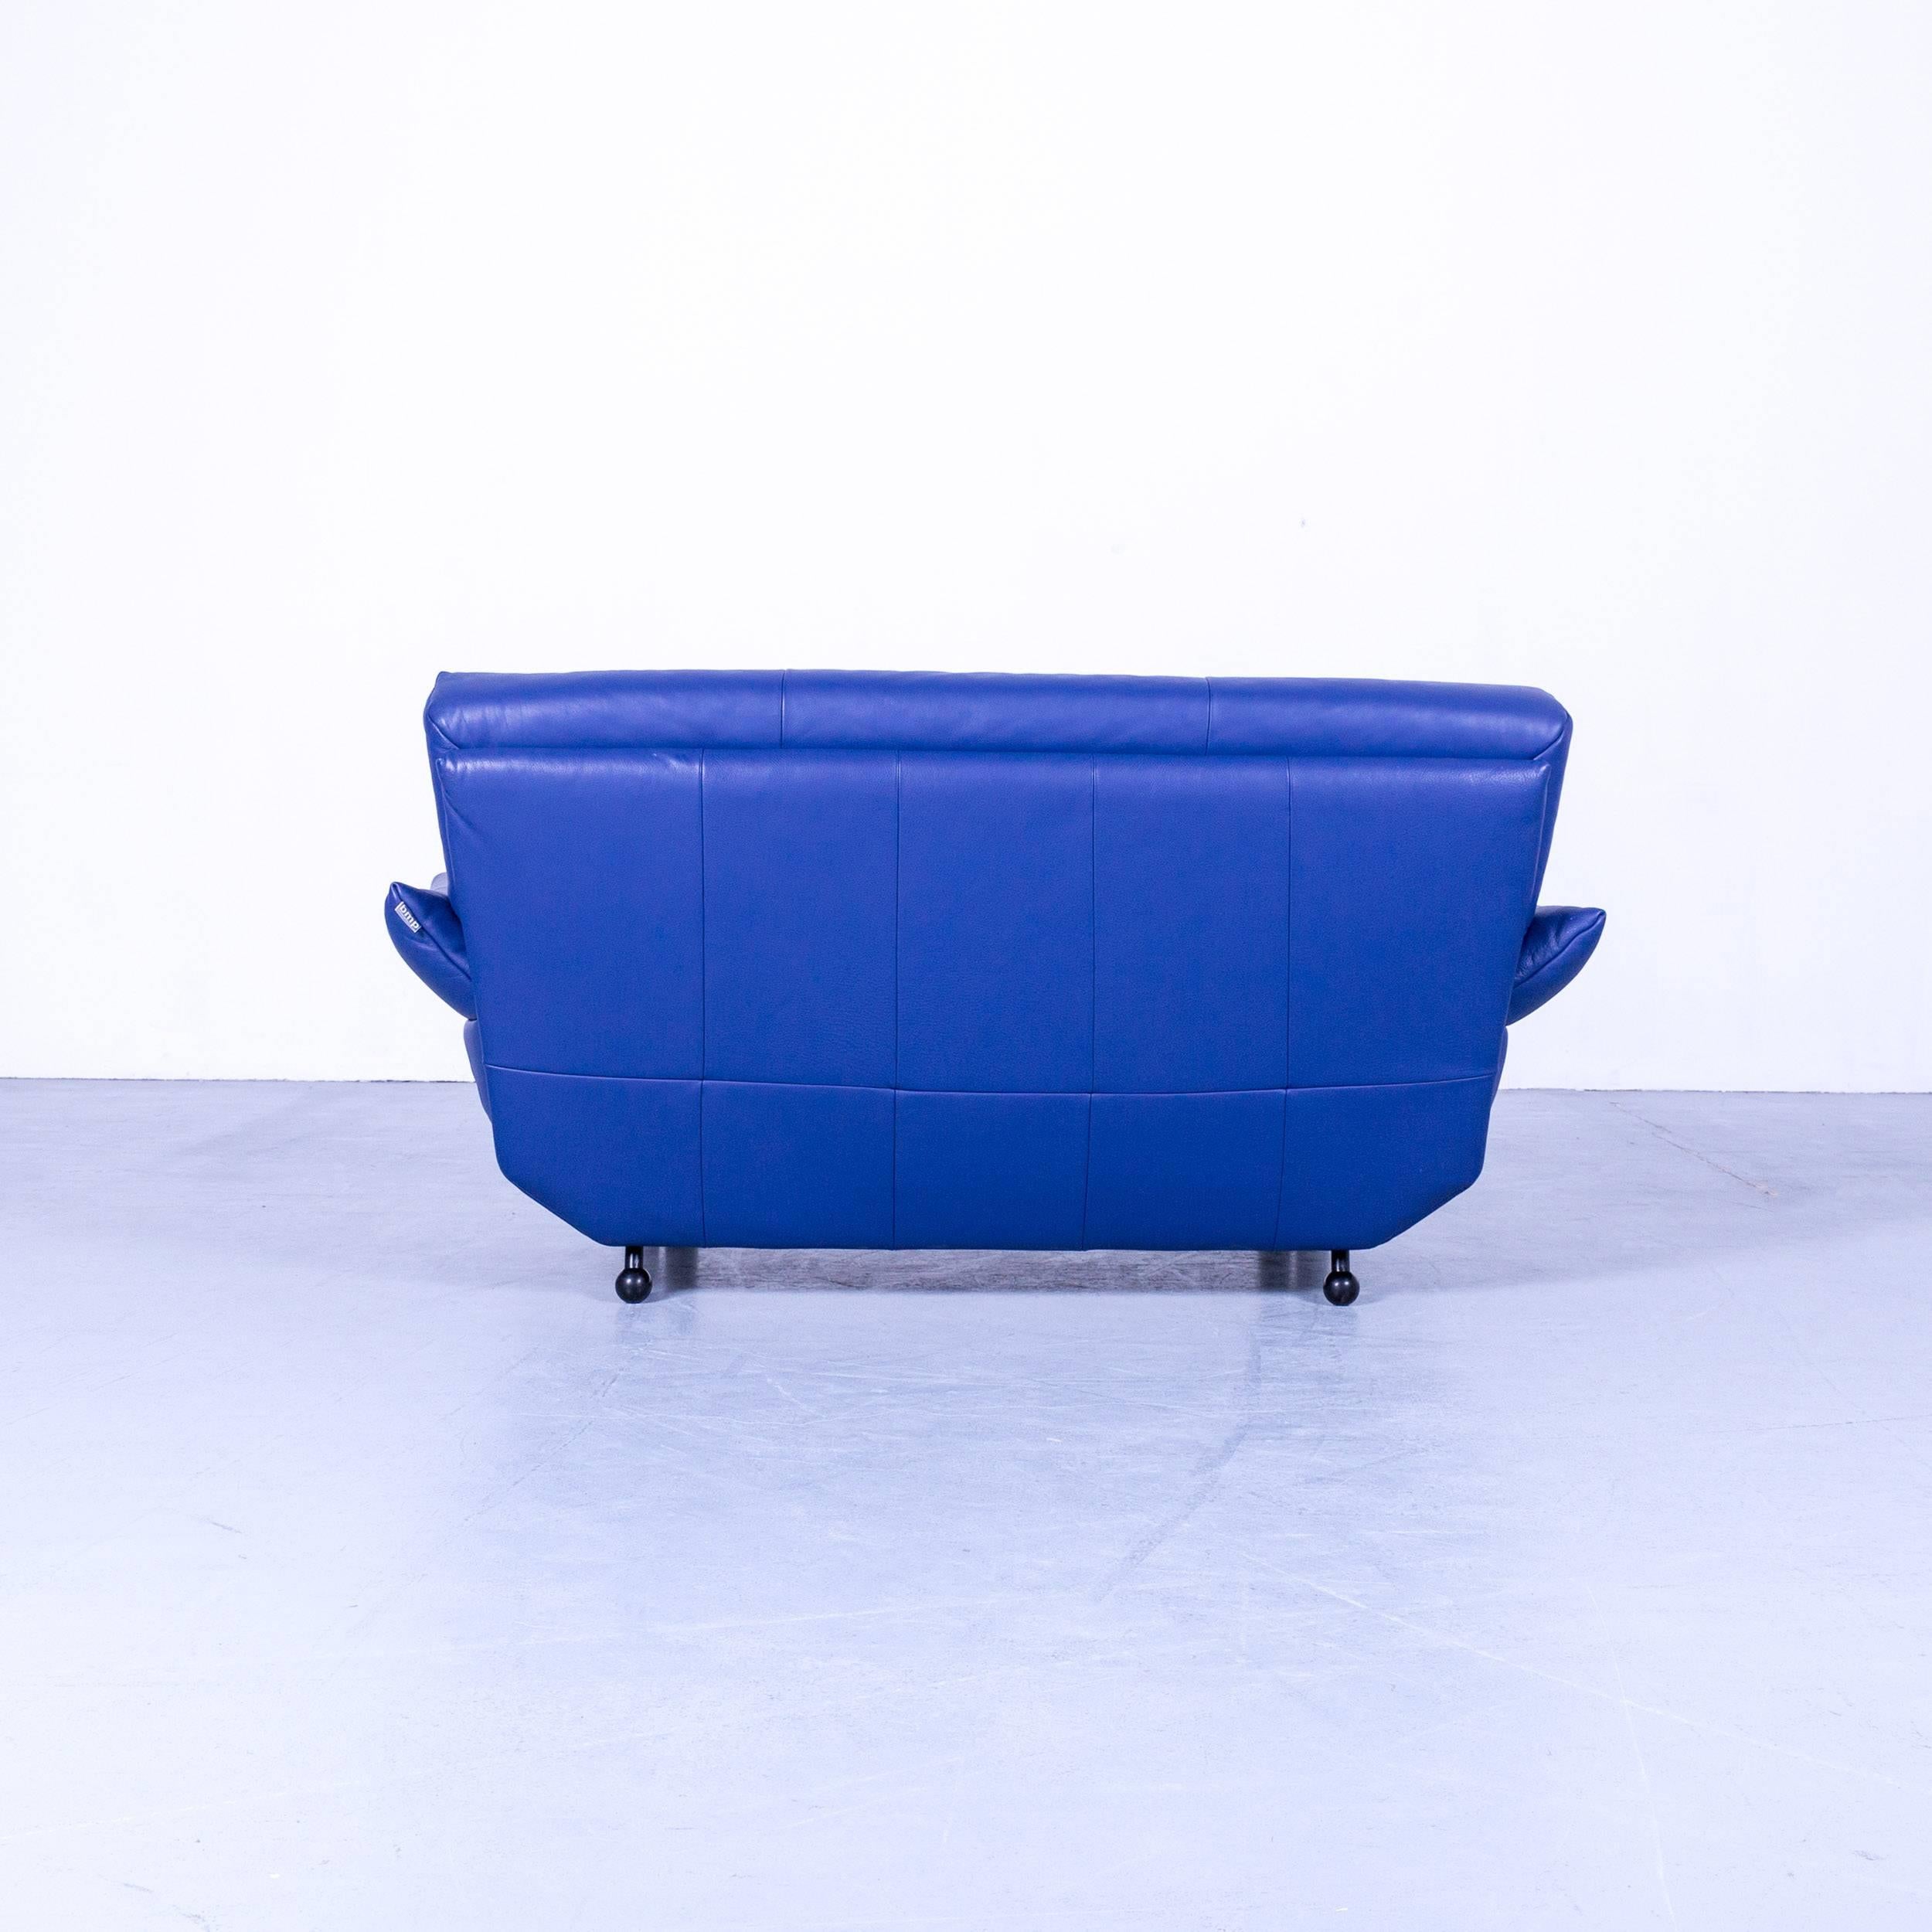 Rolf Benz Bmp Designer Sofa Leather Blue Two-Seat Couch Modern 3